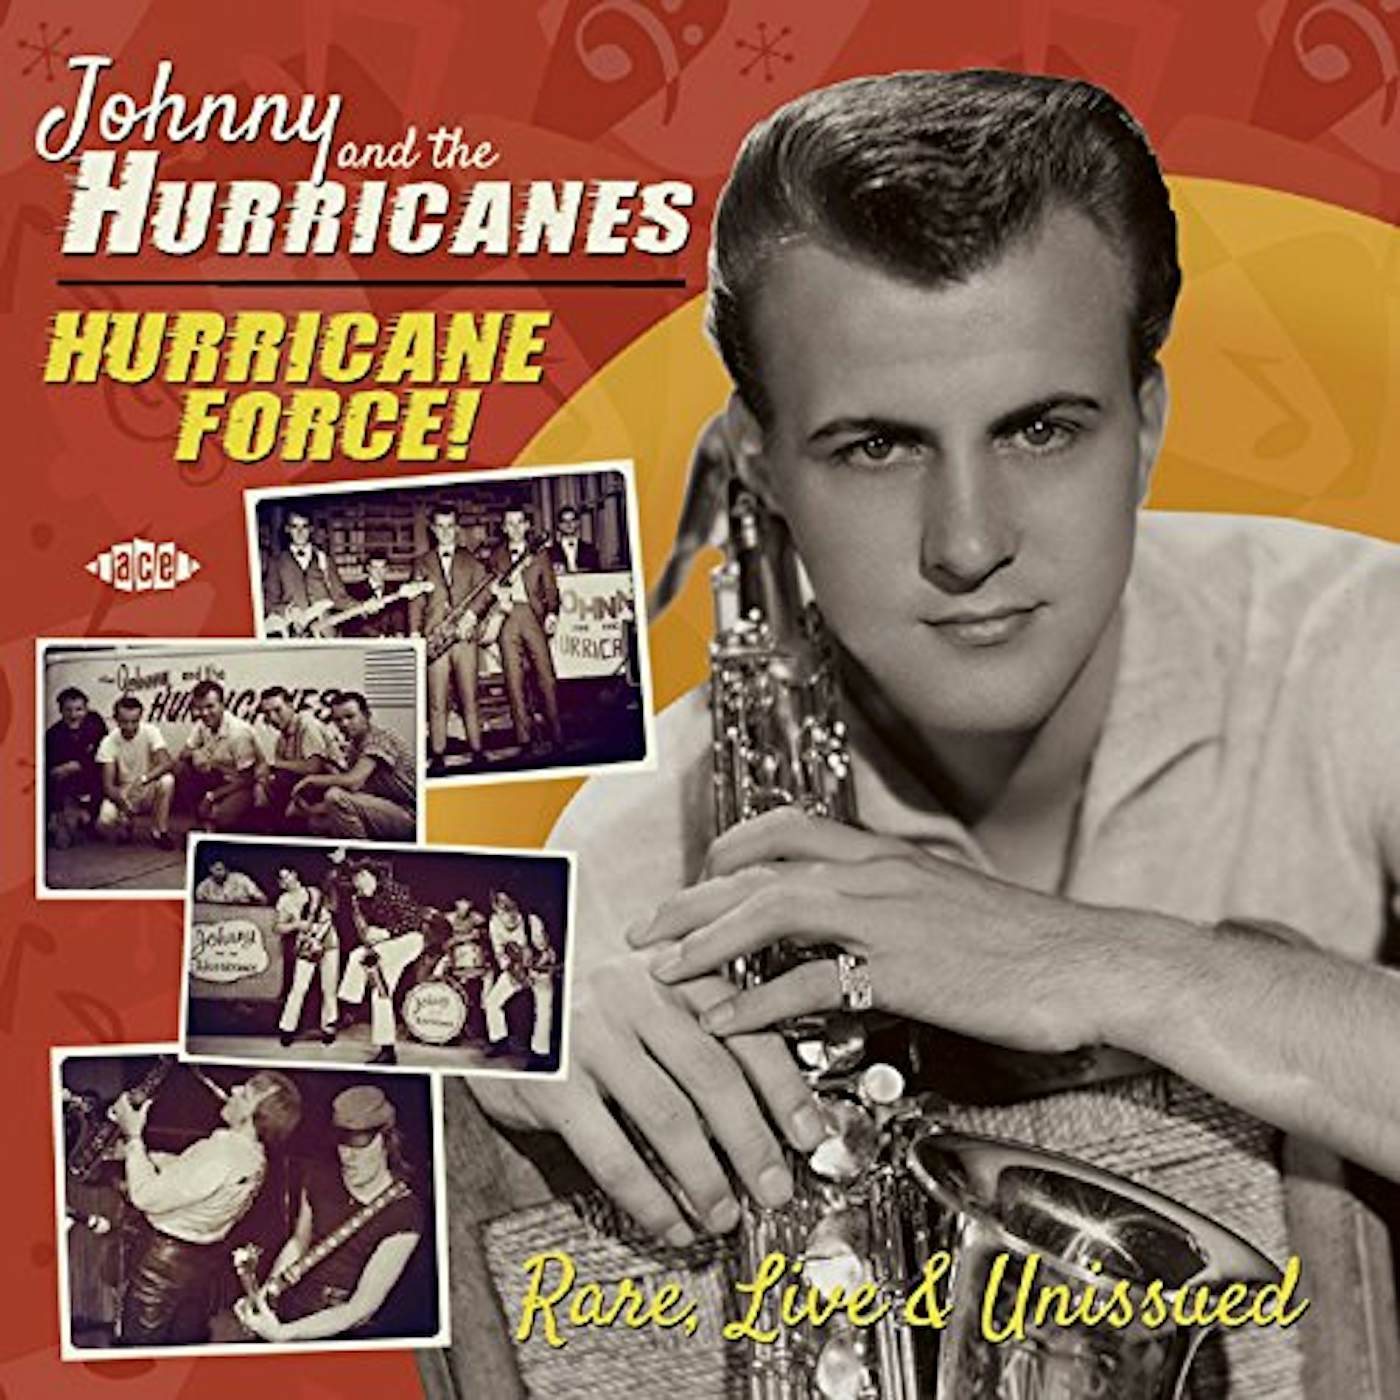 Johnny & The Hurricanes HURRICANE FORCE RARE LIVE & UNISSUED CD